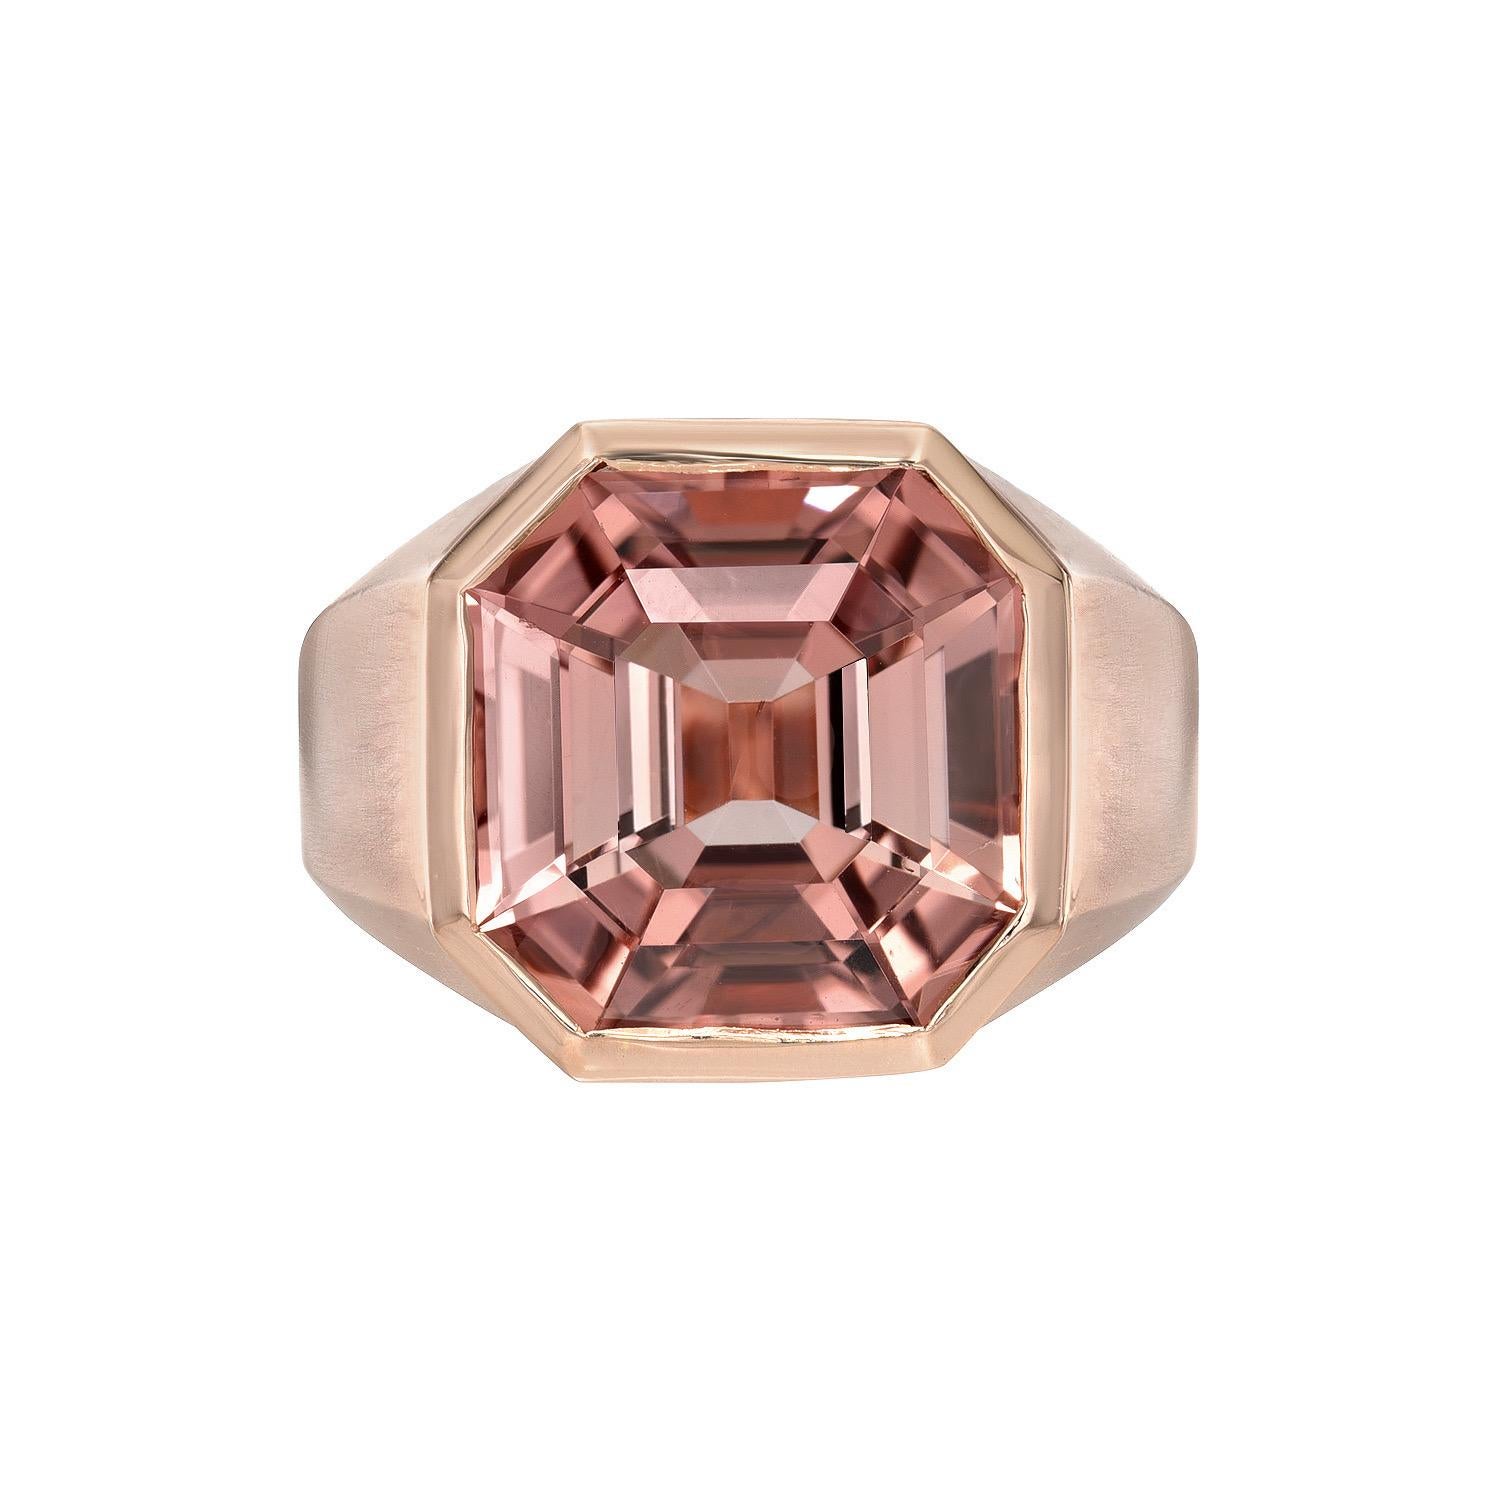 Magnificent 18K rose gold ring set with a supreme 7.76 carat Peach Tourmaline square octagon. Matte finish.
Ring size 6. Resizing is complementary upon request.
Crafted by extremely skilled hands in the USA.
Returns are accepted and paid by us